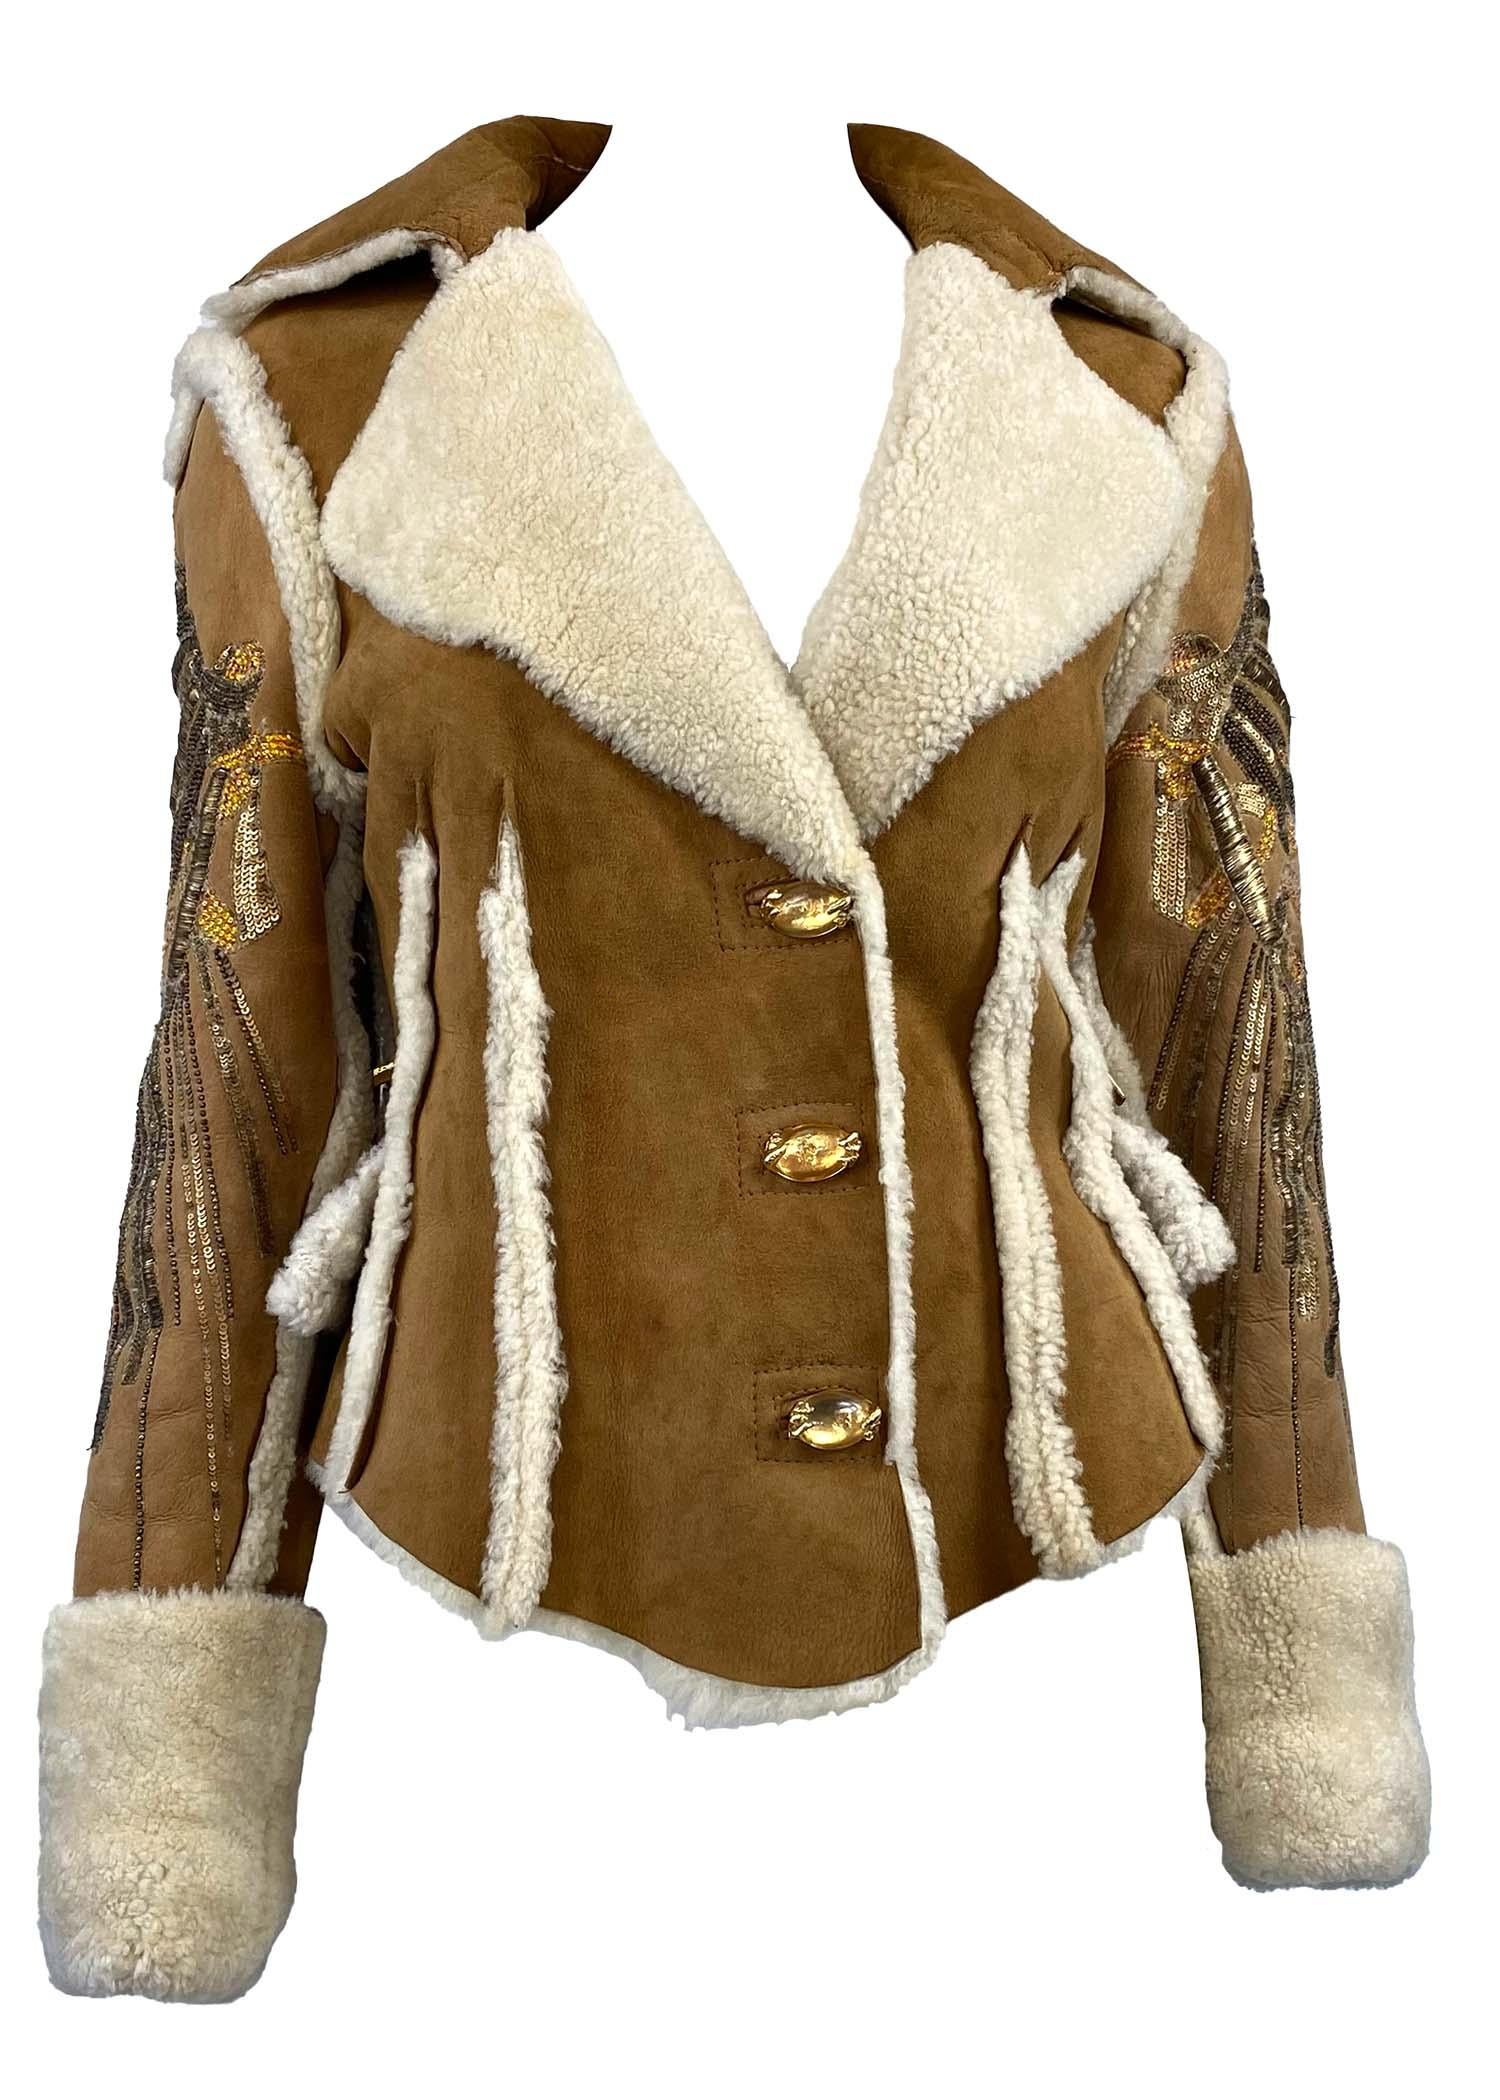 Women's F/W 2004 Roberto Cavalli Shearling Leather Coat Unicorn Sequin Bead Embellished For Sale